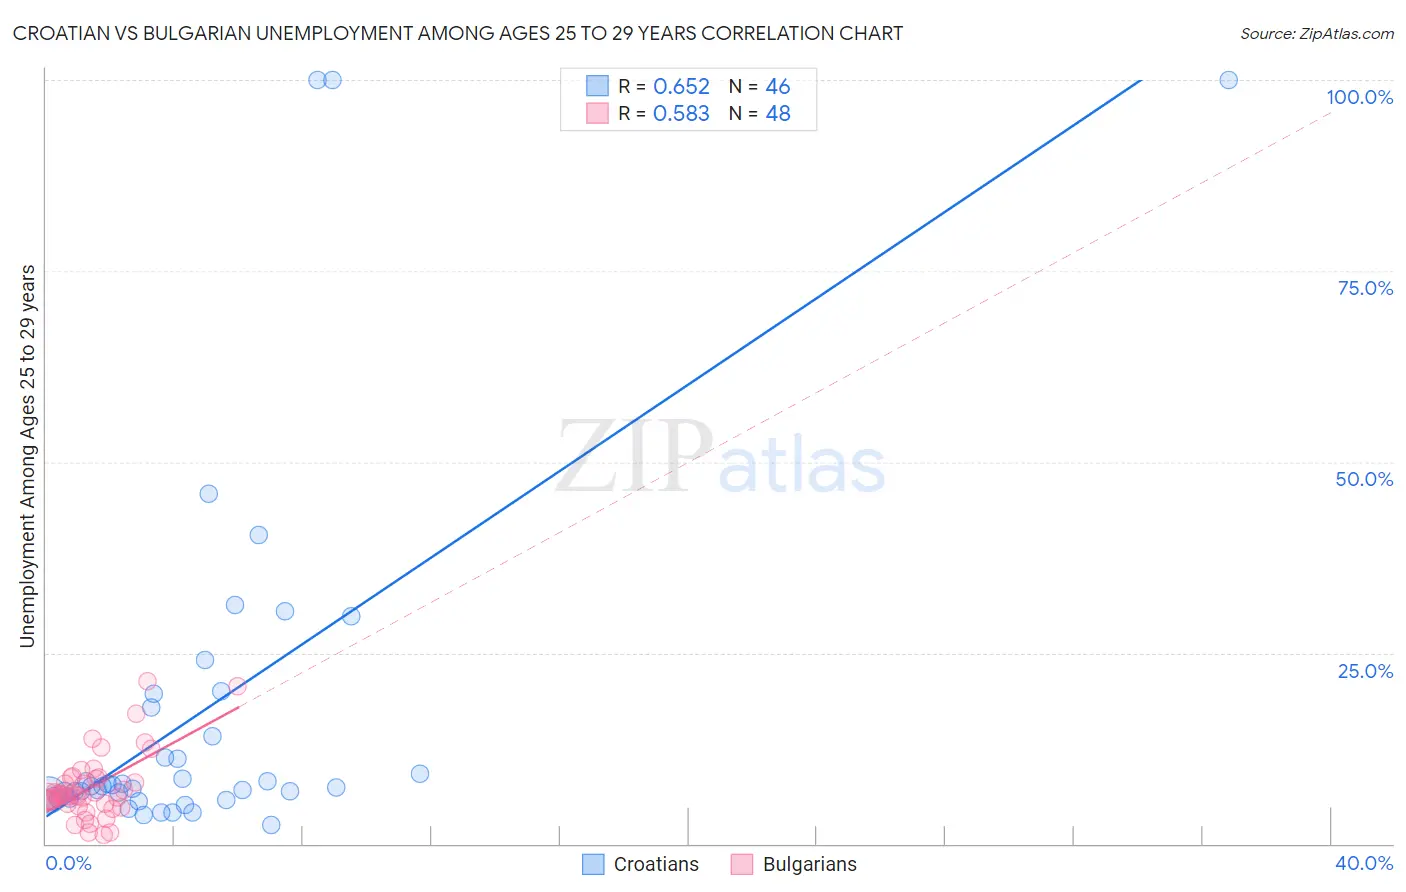 Croatian vs Bulgarian Unemployment Among Ages 25 to 29 years